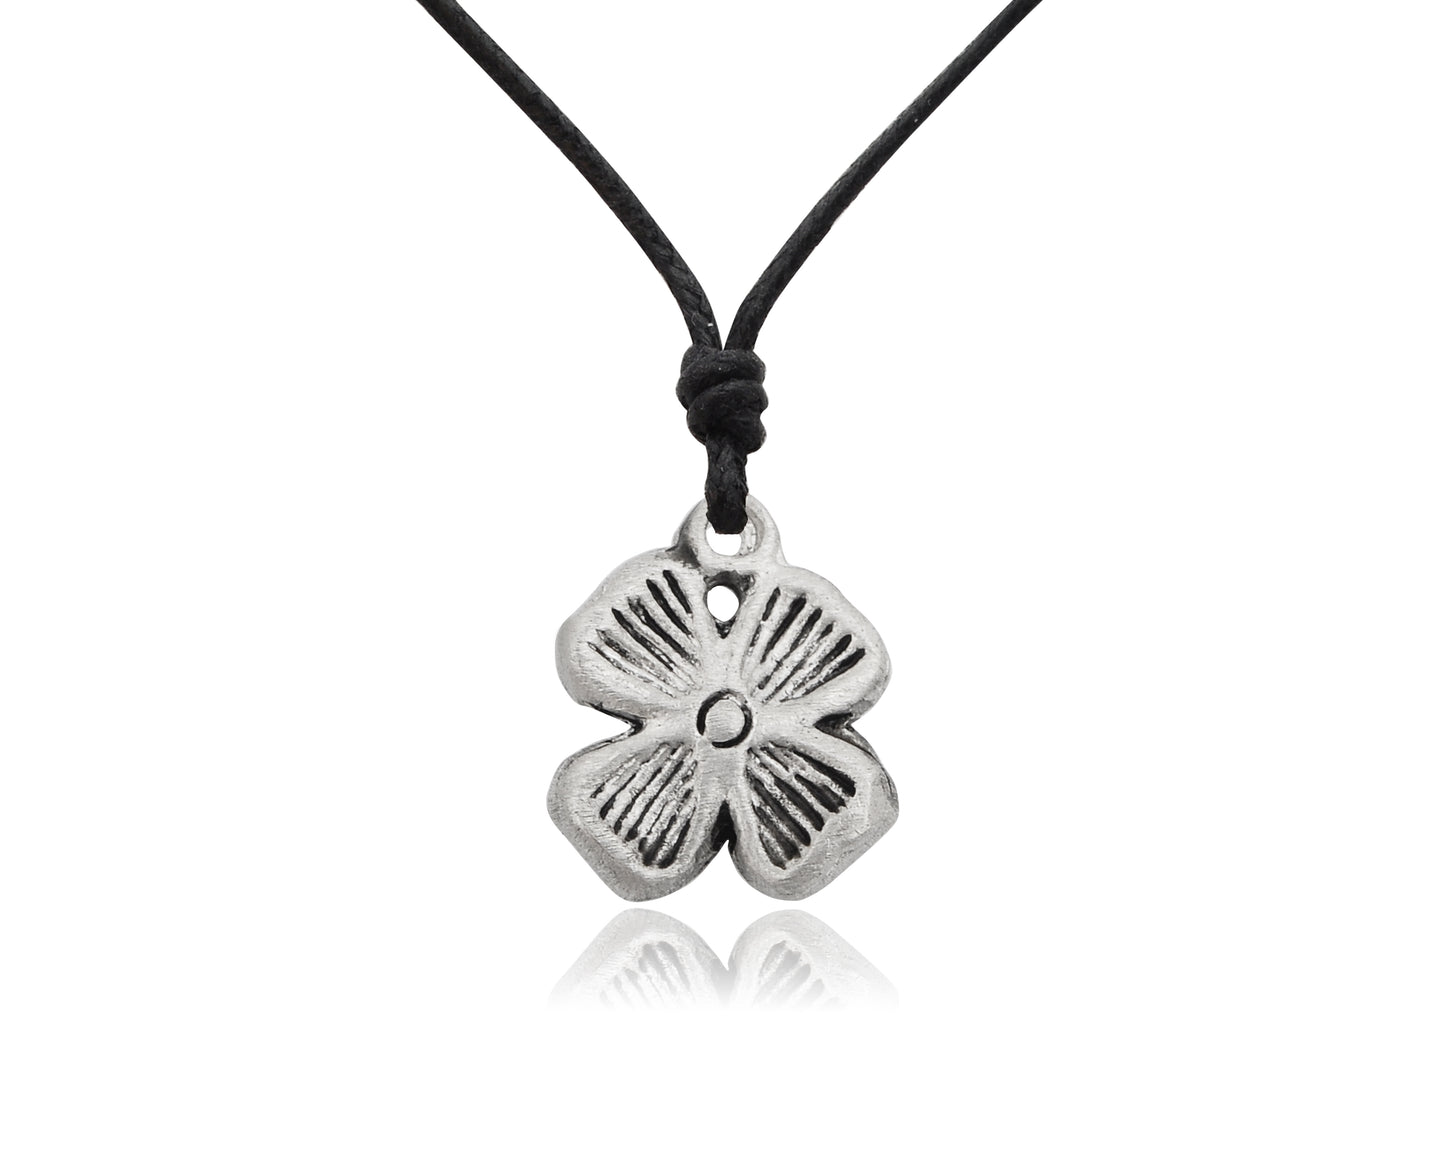 Four Leaf Clover Sterling-silver Pewter Charm Necklace Pendant Jewelry